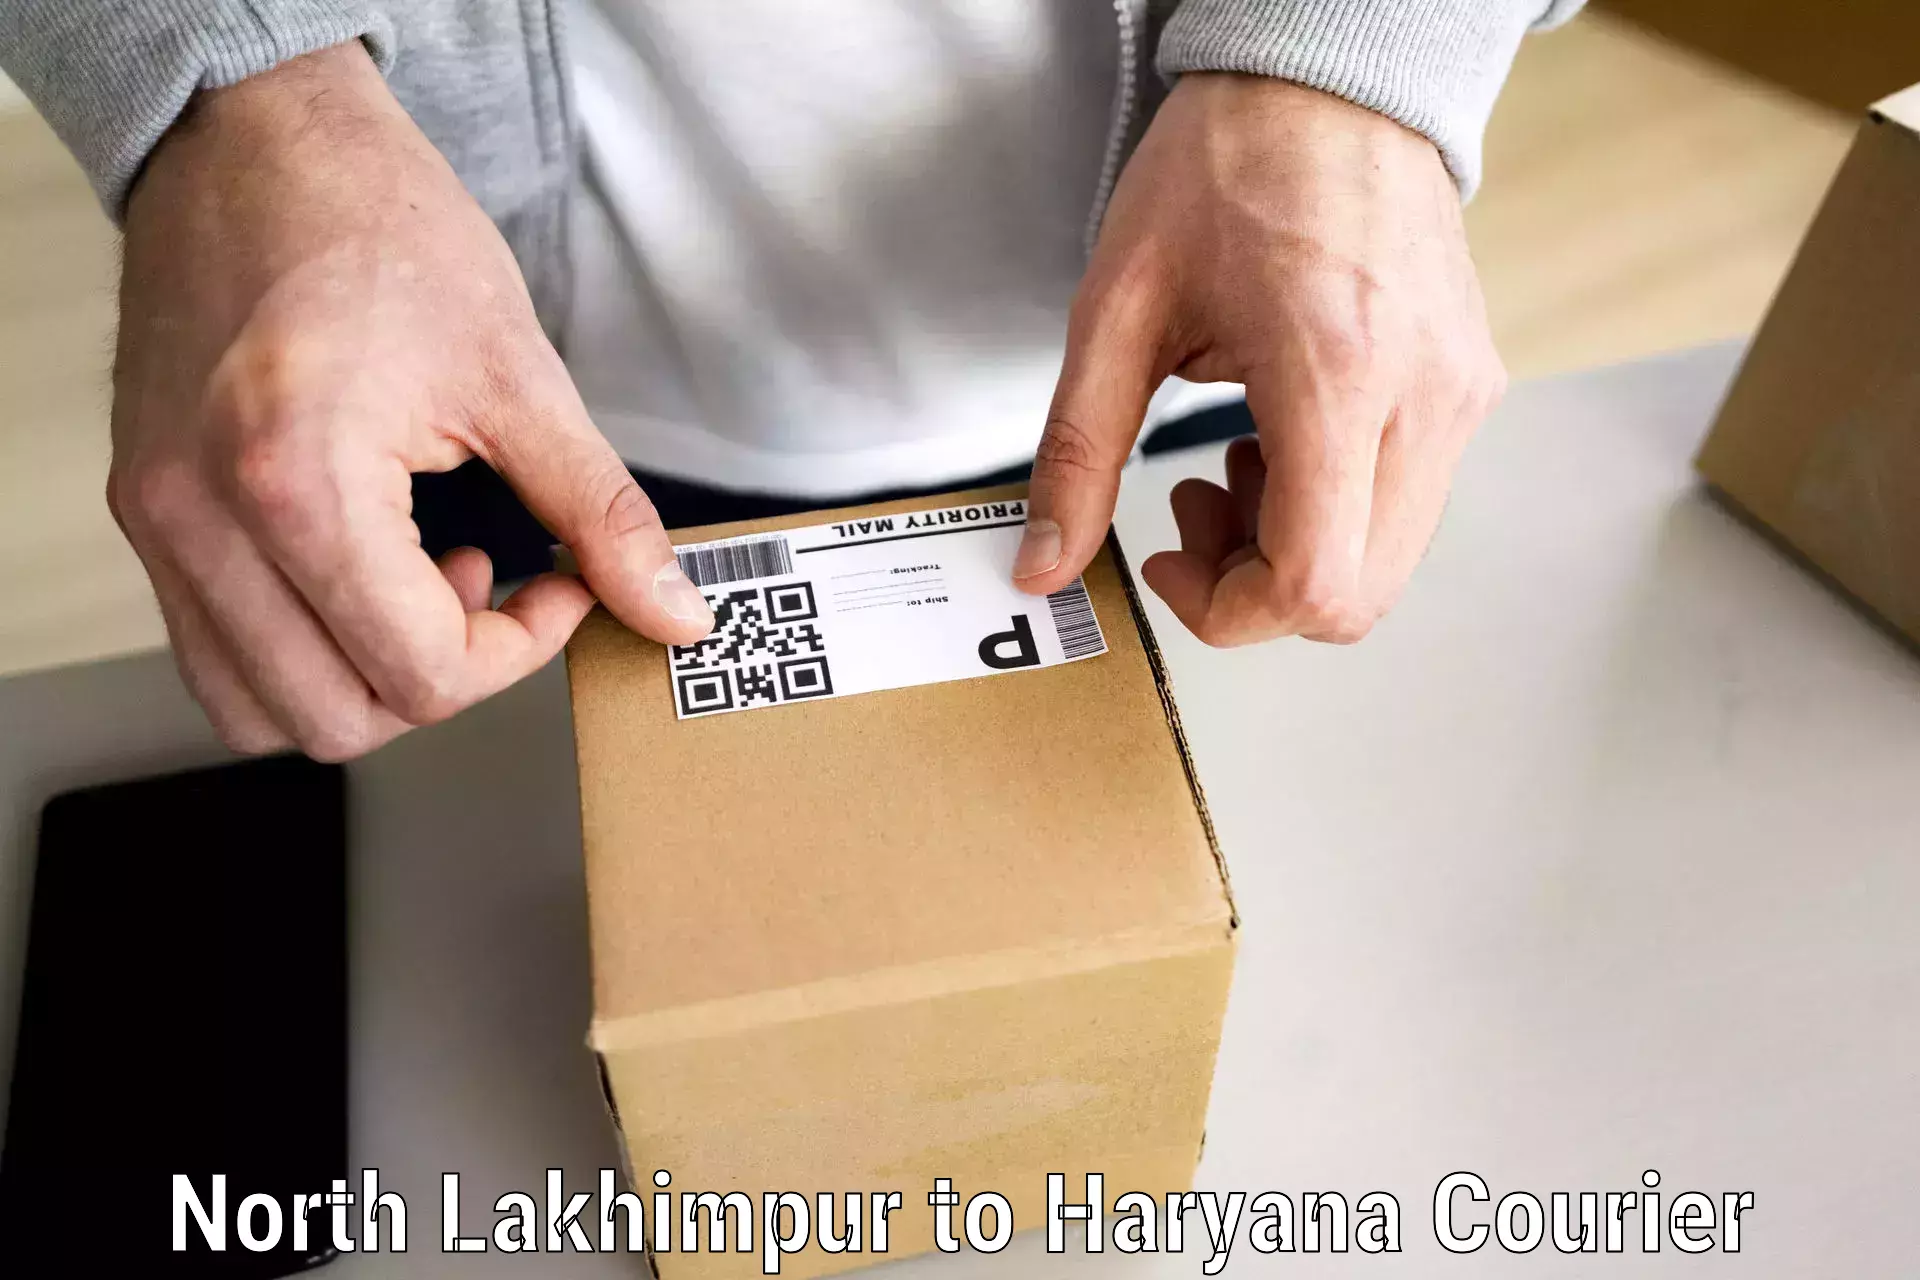 Quality moving services North Lakhimpur to Bilaspur Haryana